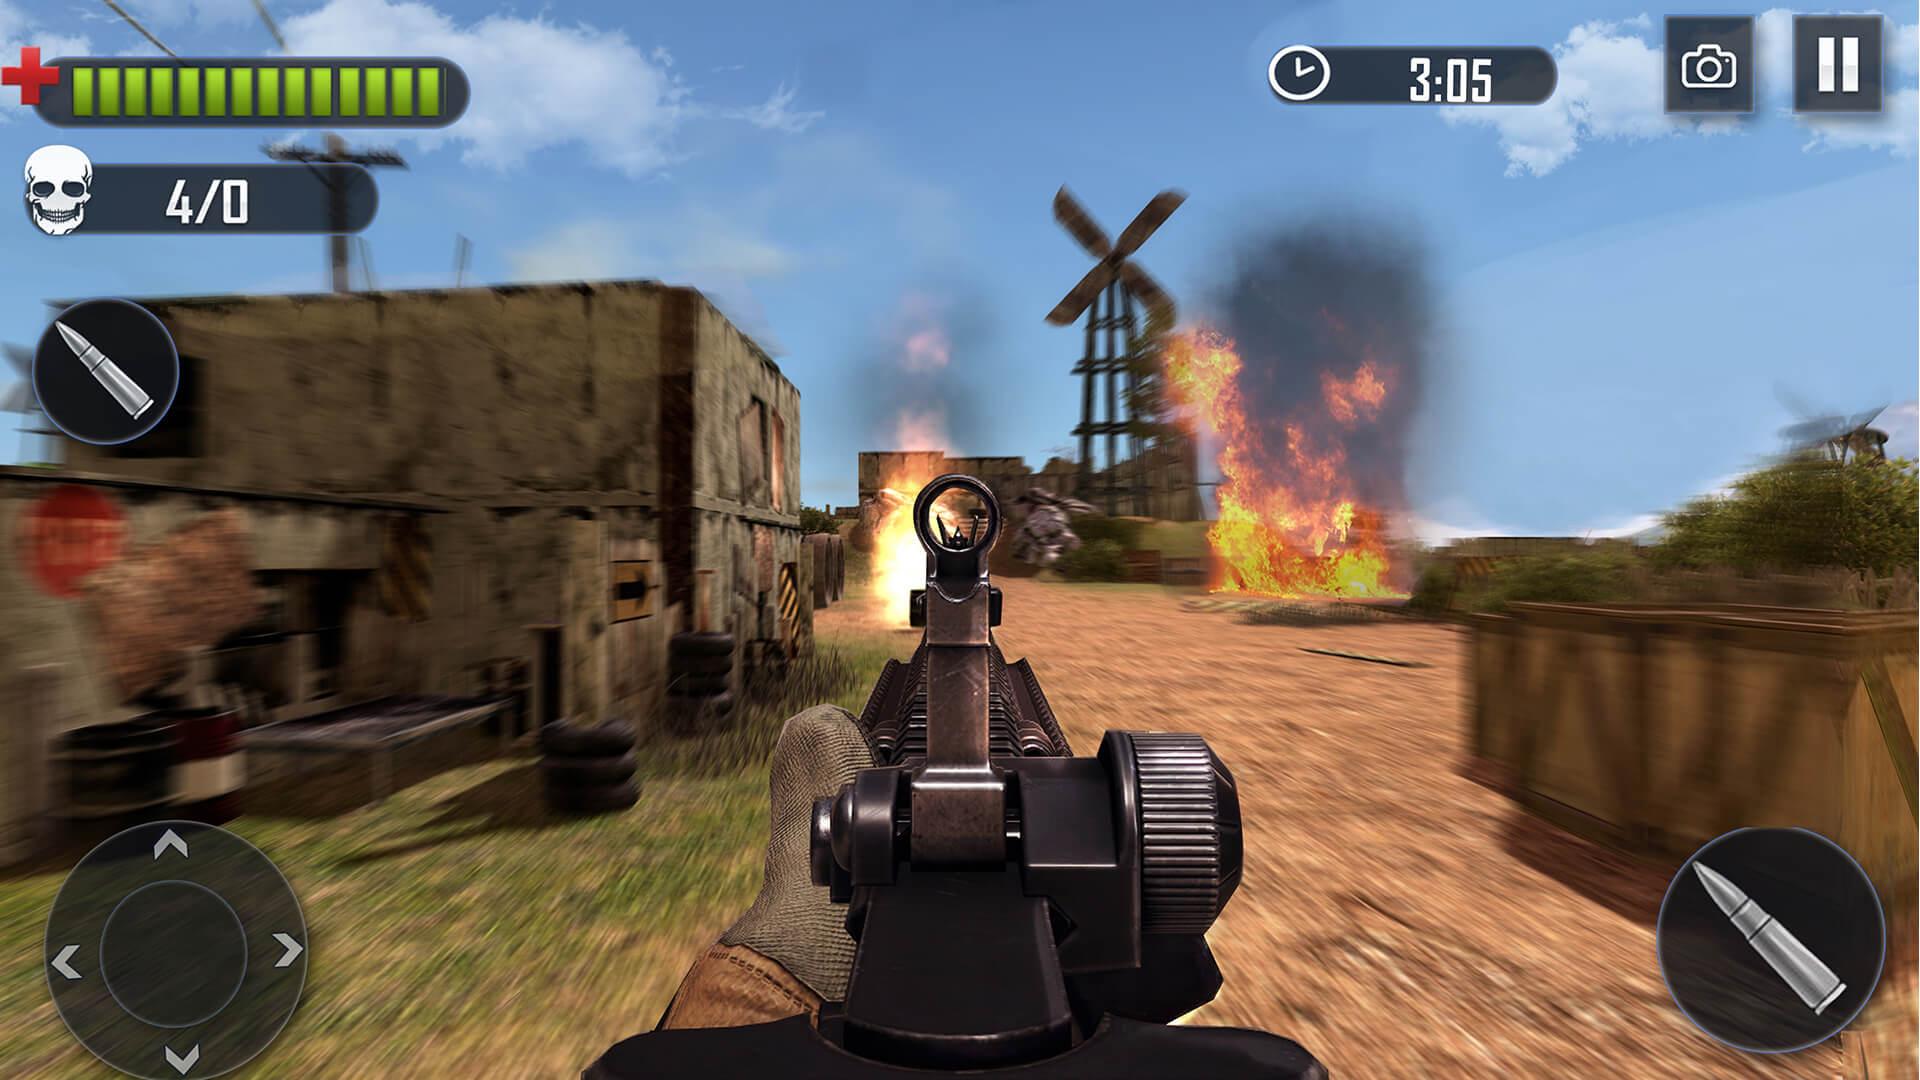 Battleground Fire Cover Strike Free Shooting Game Apk 2 1 1 Download For Android Download Battleground Fire Cover Strike Free Shooting Game Apk Latest Version Apkfab Com